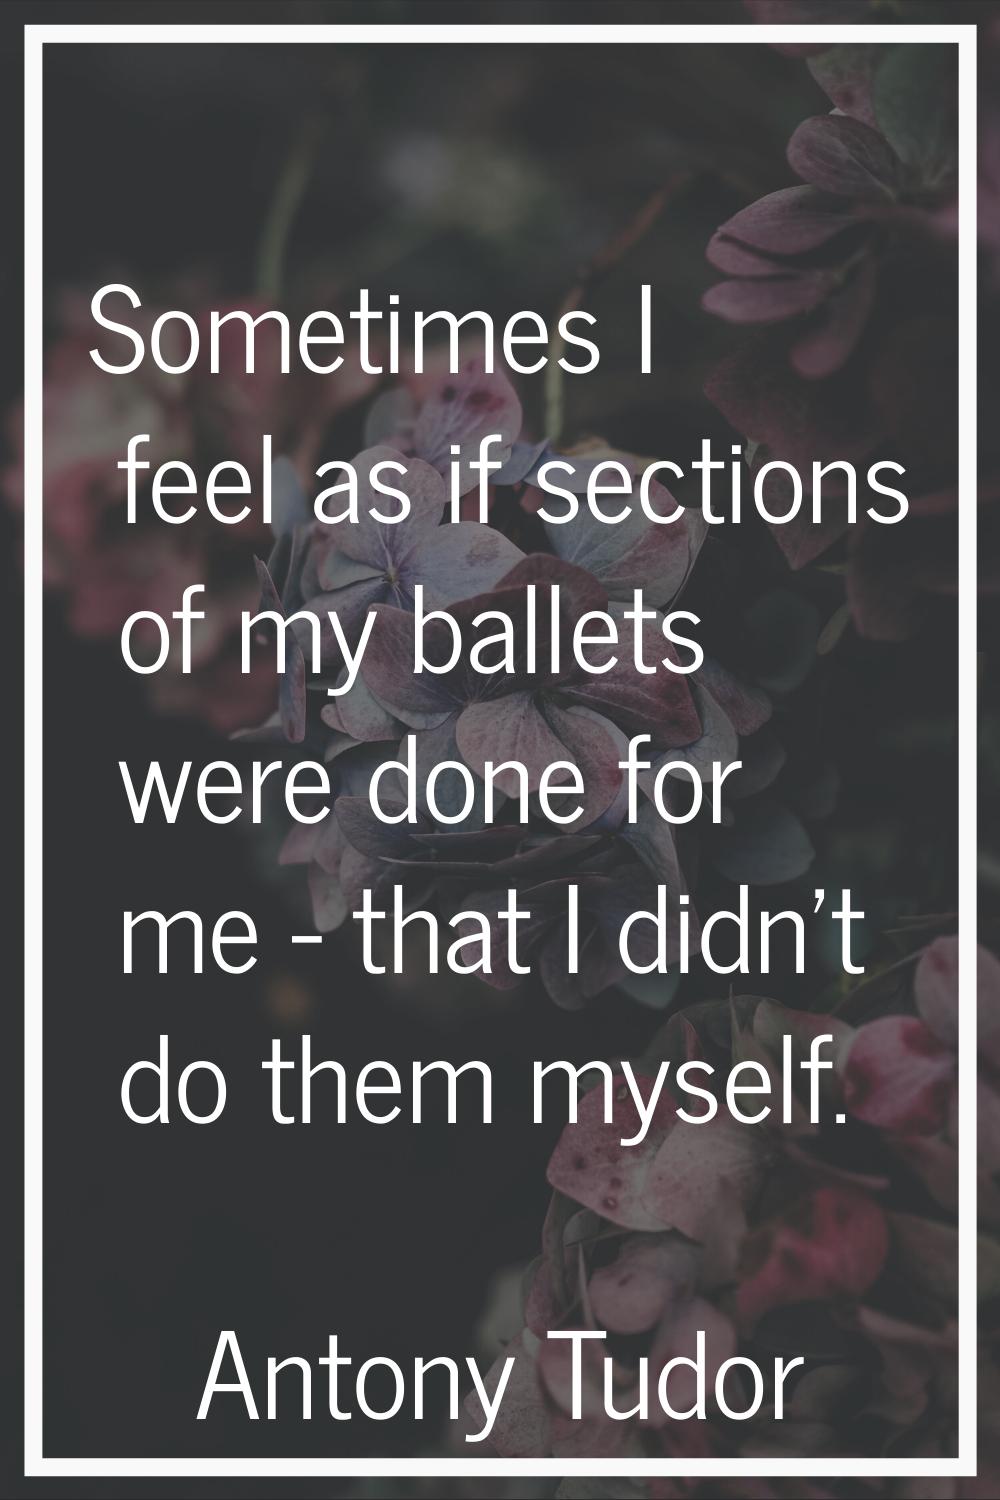 Sometimes I feel as if sections of my ballets were done for me - that I didn't do them myself.